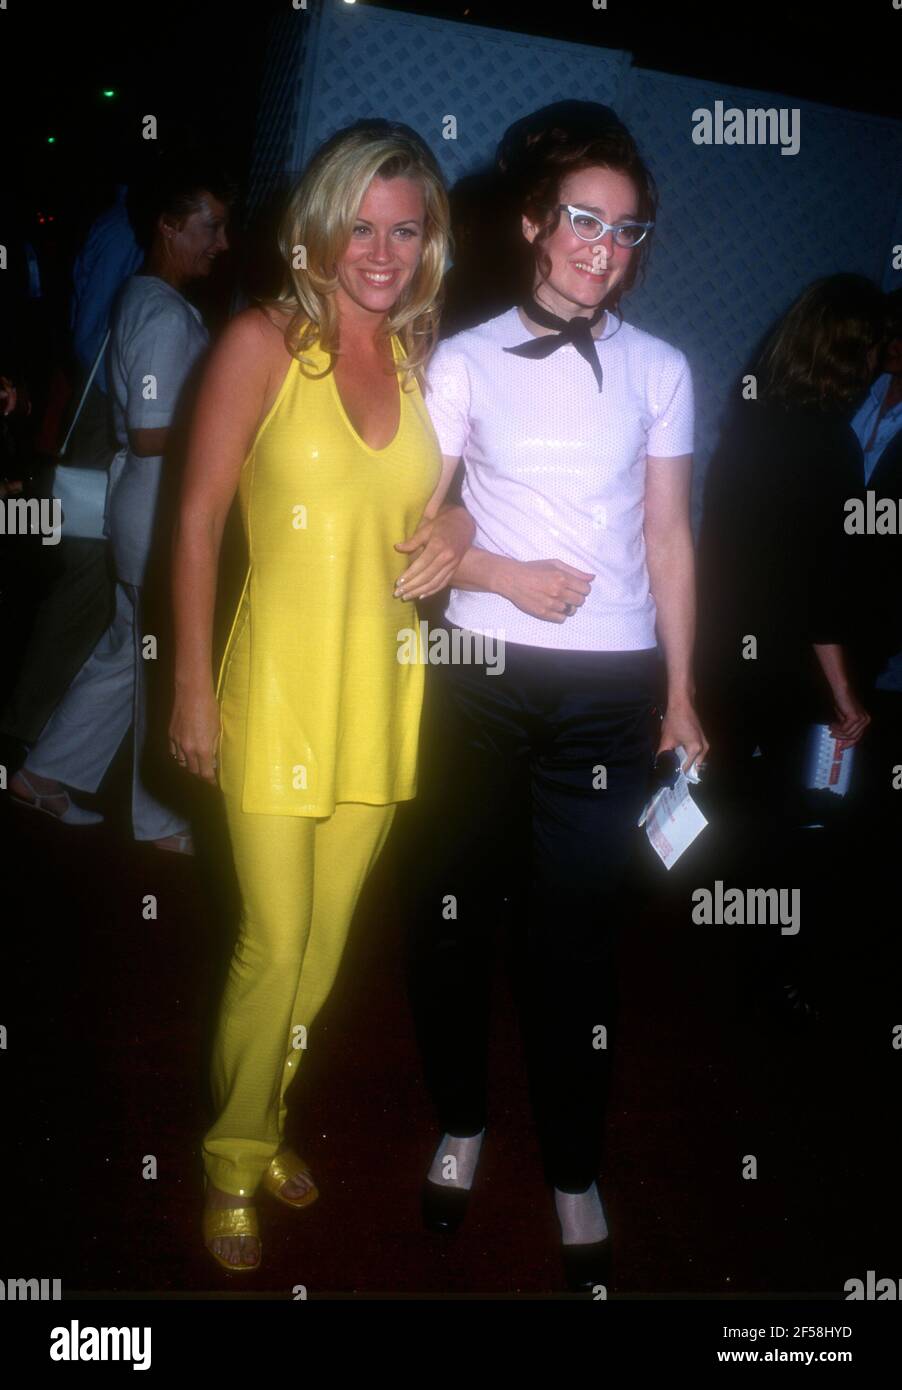 Westwood, California, USA 20th May 1996 Actress Jenny McCarthy and VJ Kennedy, aka Lisa Kennedy Montgomery attend Paramount Pictures' 'Mission Impossible' Premiere on May 20, 1996 at Mann Bruin Theatre in Westwood, California, USA. Photo by Barry King/Alamy Stock Photo Stock Photo